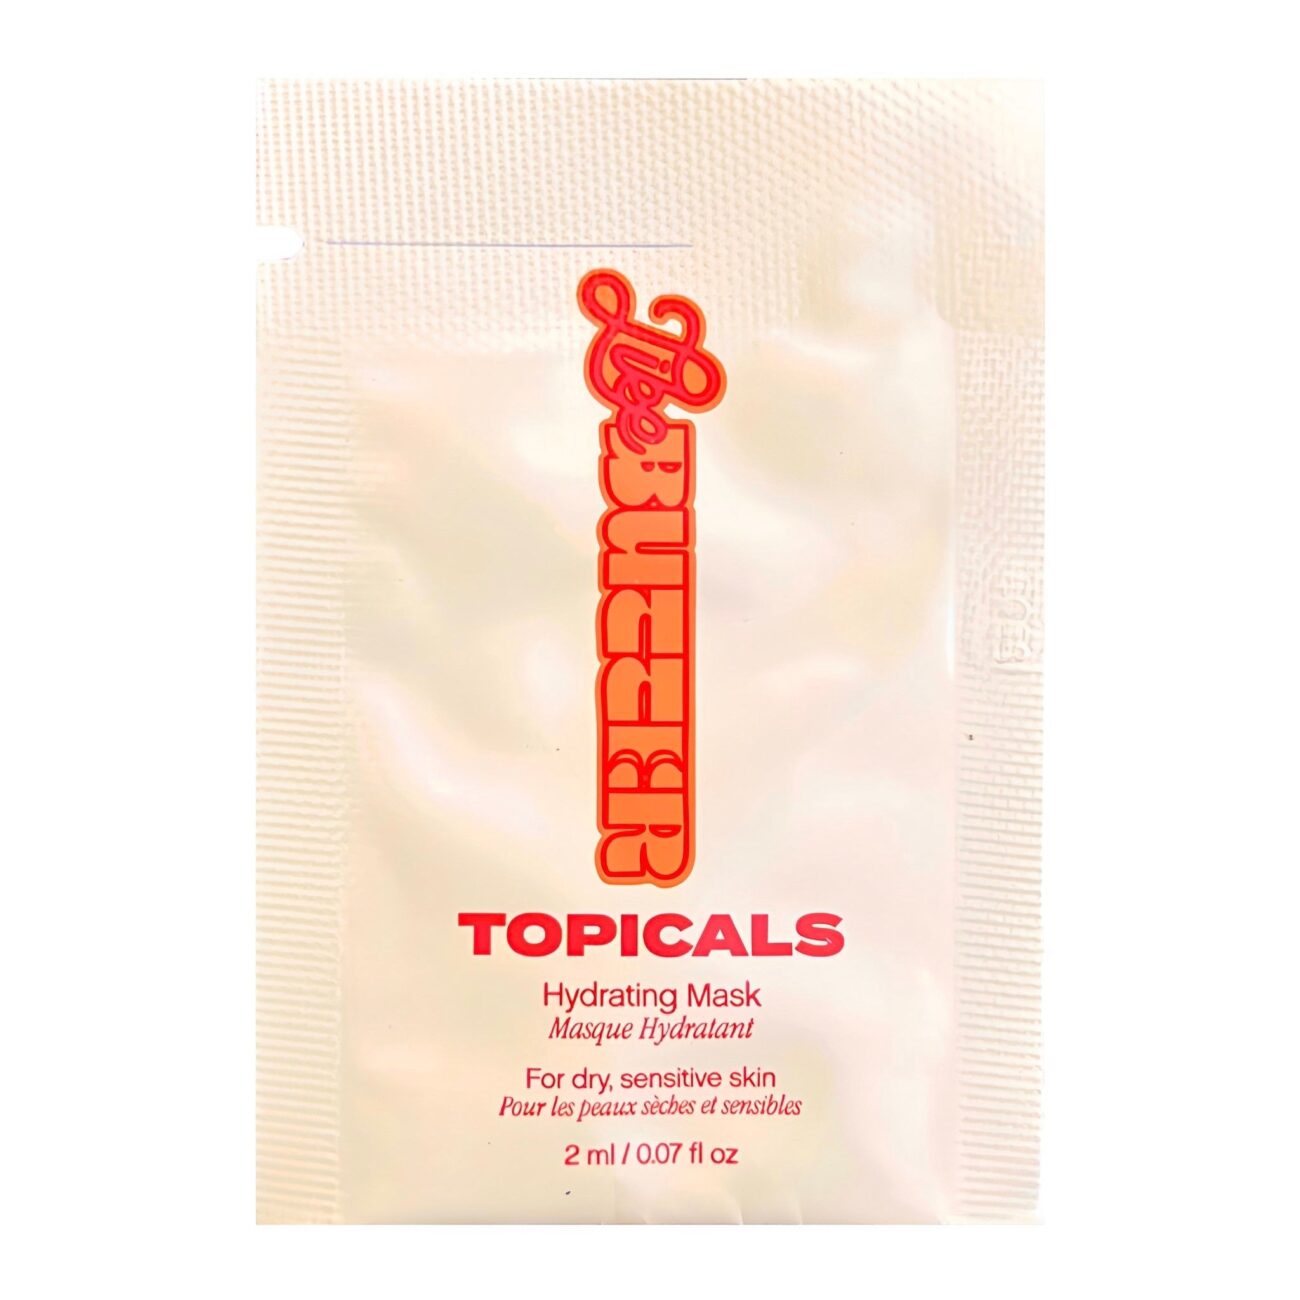 Topicals hydrating face mask sachet for sensitive skin.